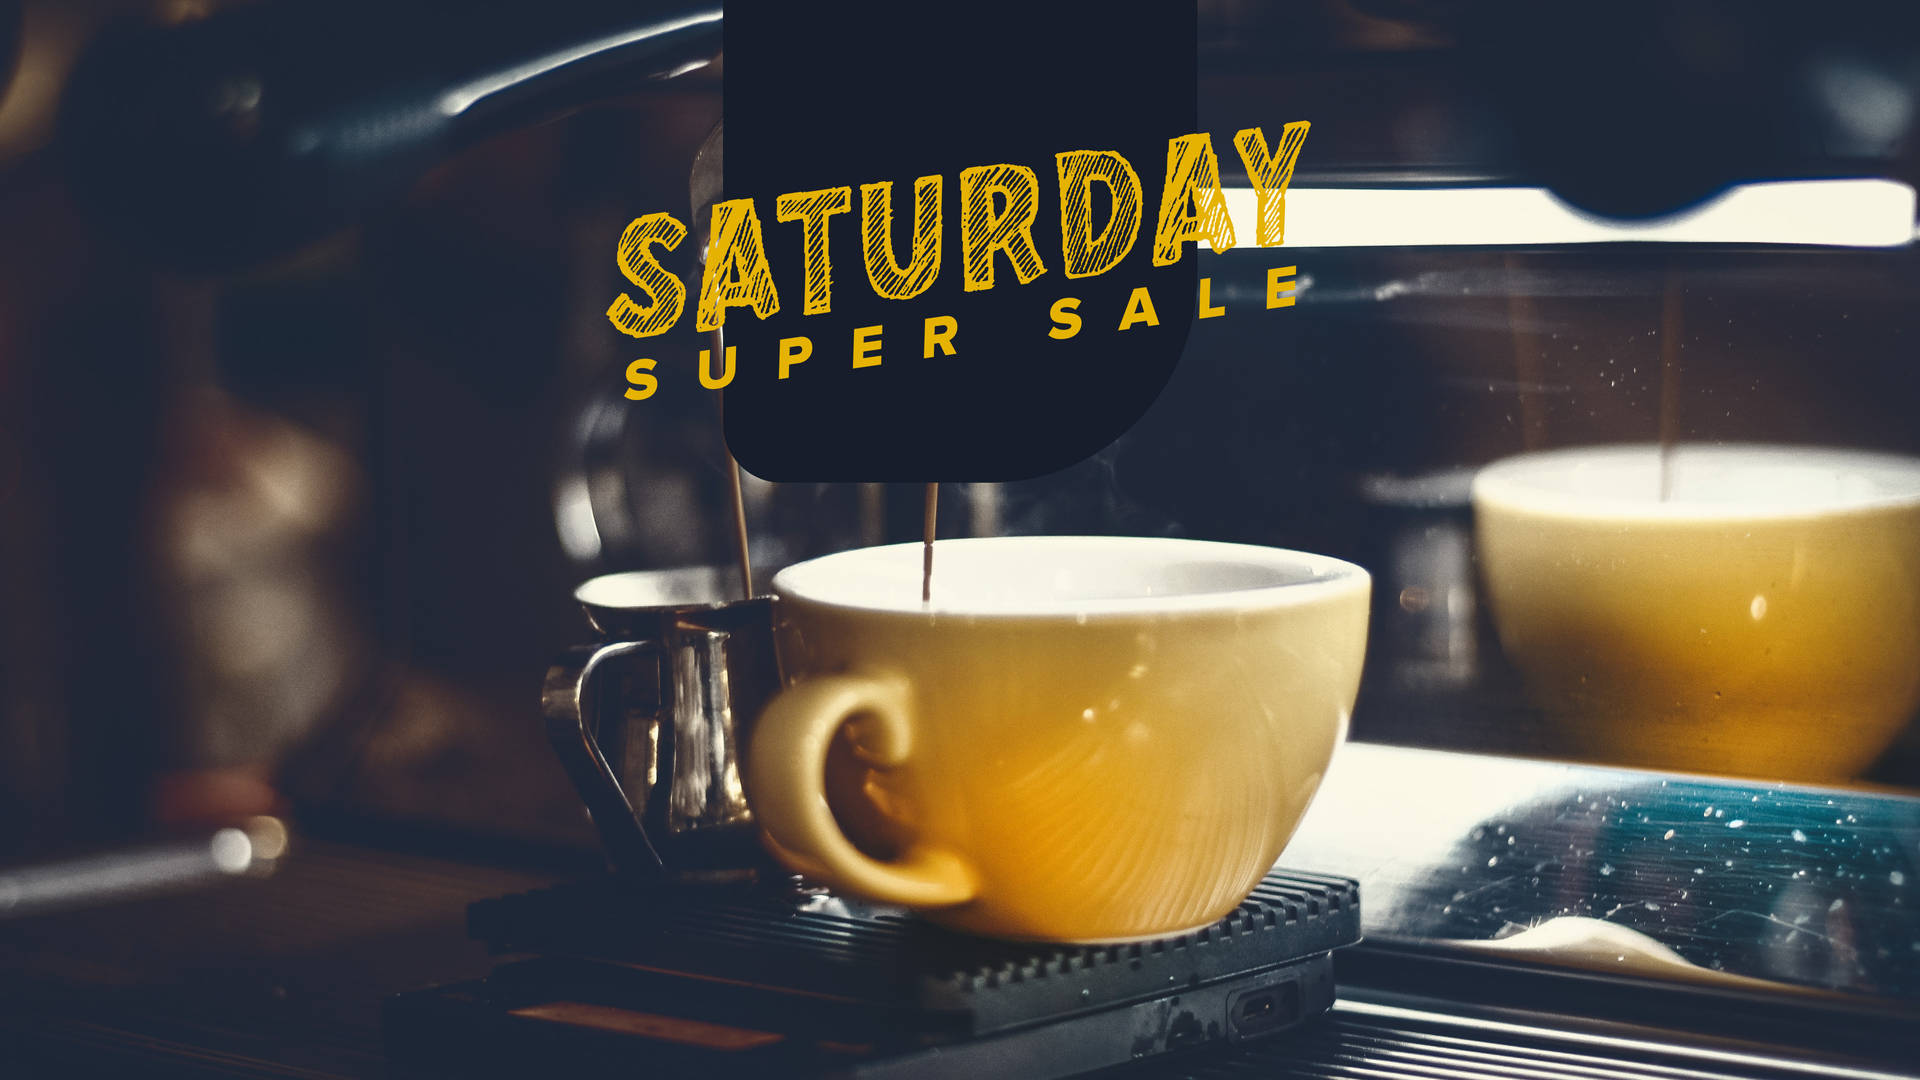 Coffee-themed Super Saturday Sale Background